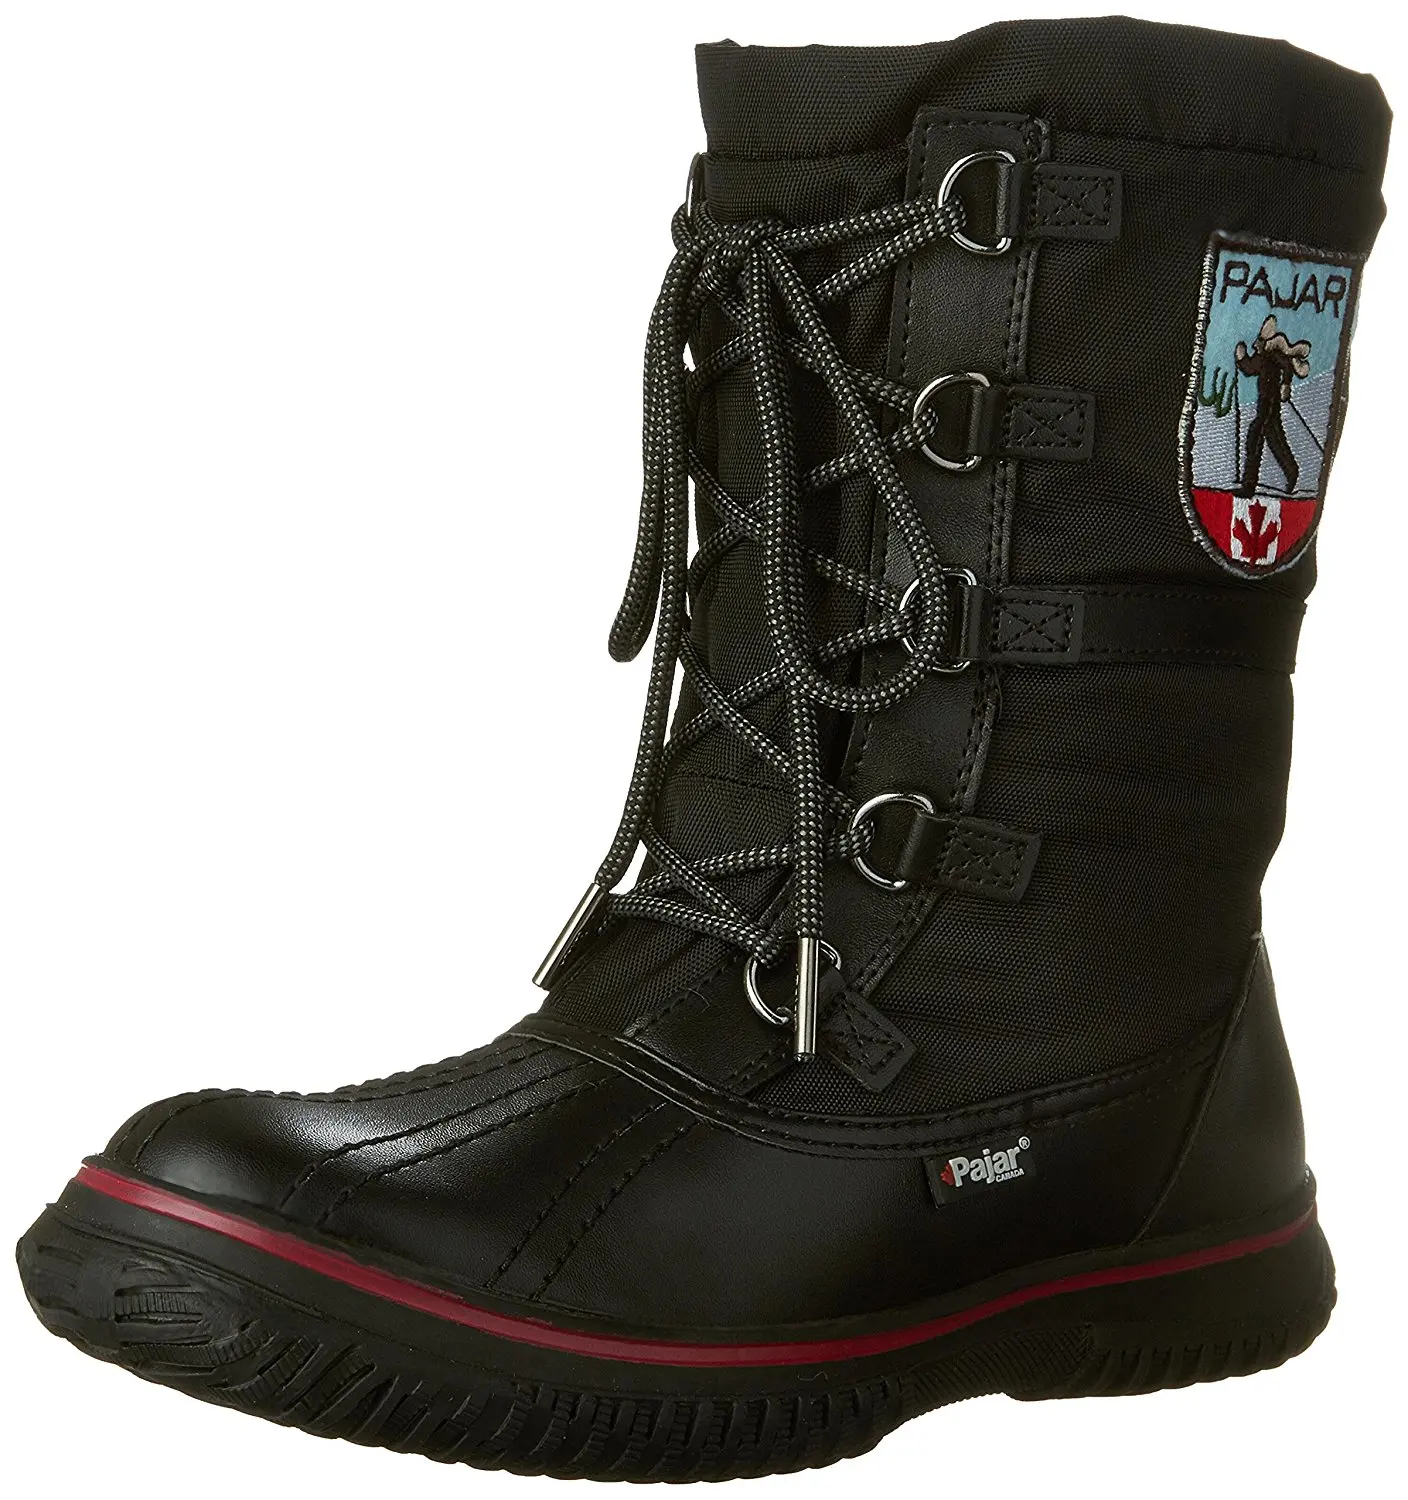 Buy Pajar Womens Grip Boot in Cheap Price on Alibaba.com